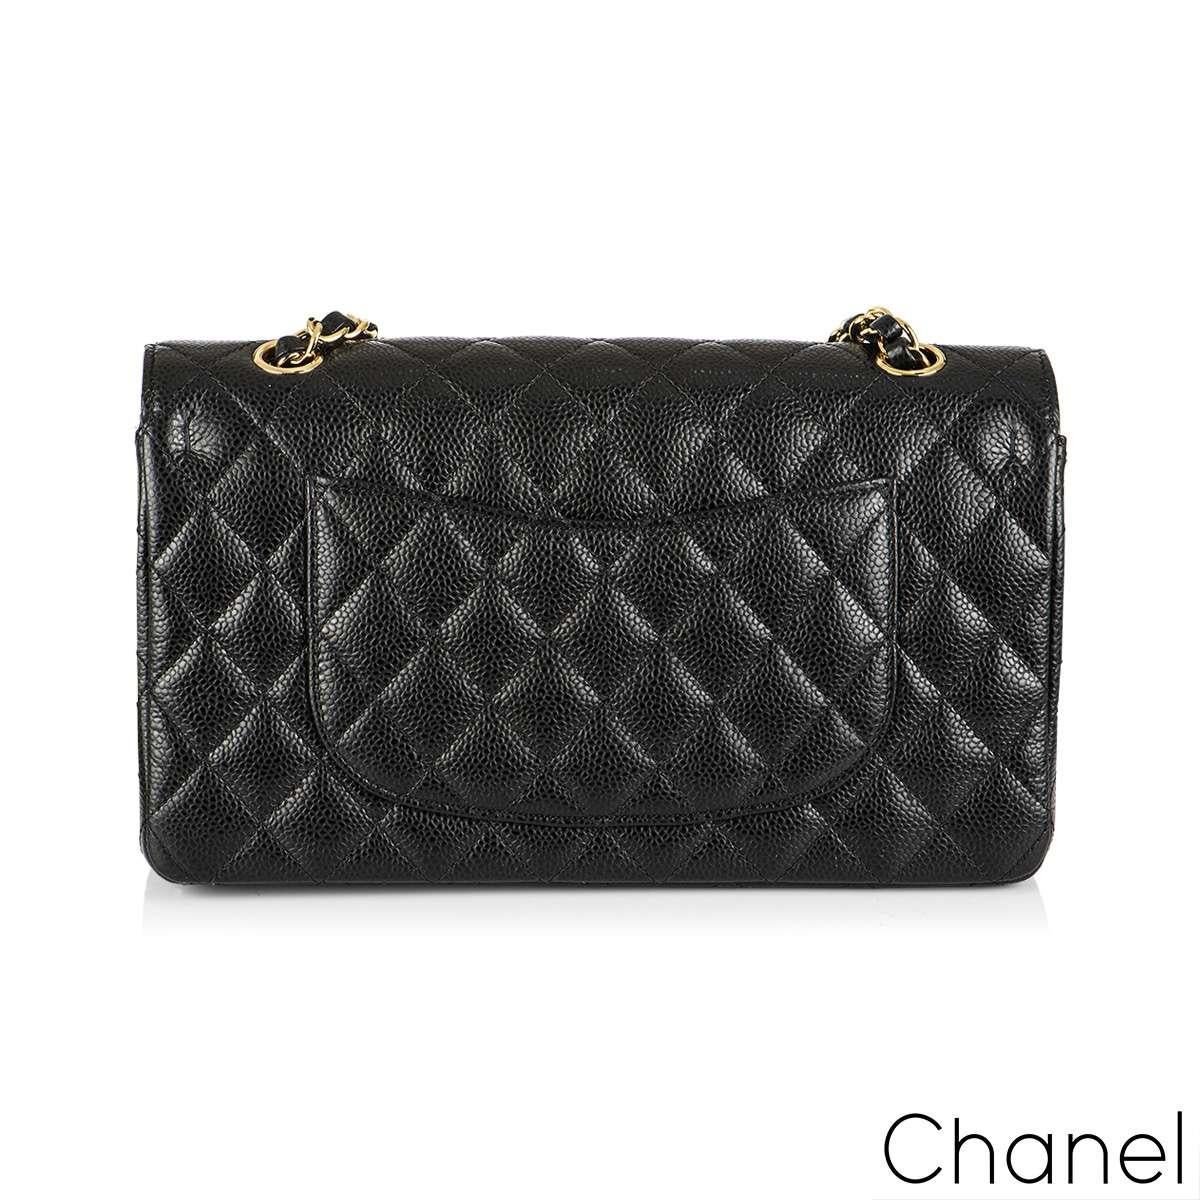 A Timeless Chanel Classic Double Flap Handbag. The exterior of this medium classic is in black caviar leather with gold-tone hardware. It features a front flap with signature CC turnlock closure, half moon back pocket, and adjustable interwoven